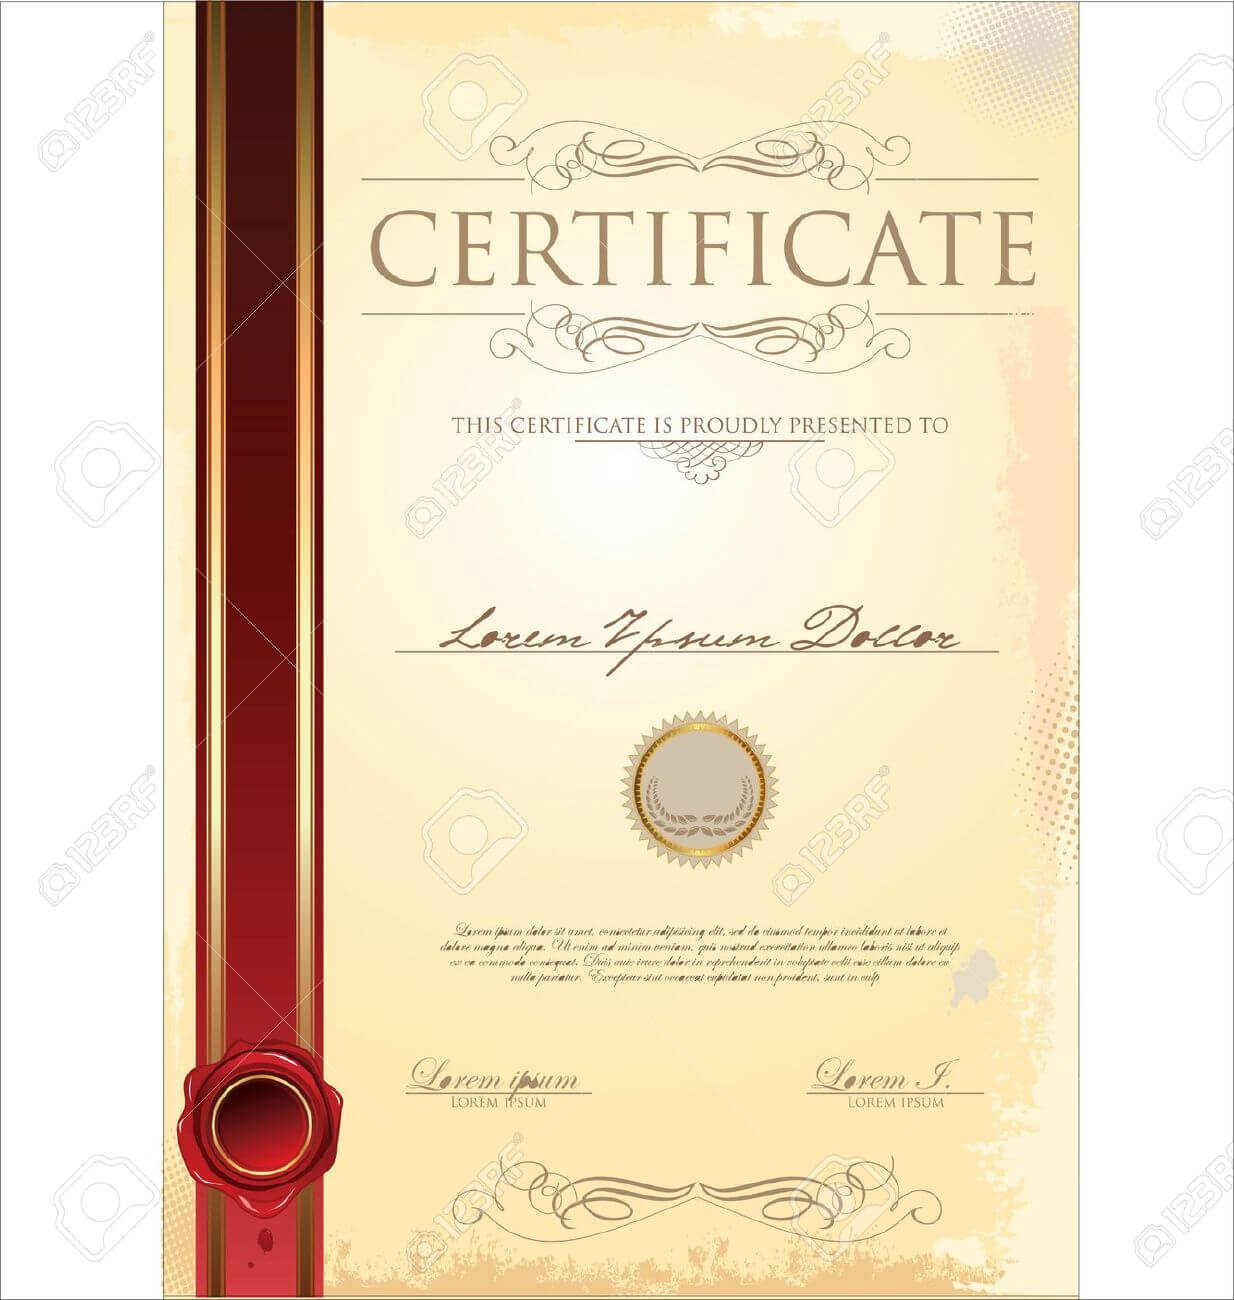 Bunch Ideas For Scroll Certificate Templates Also Sample With Scroll Certificate Templates